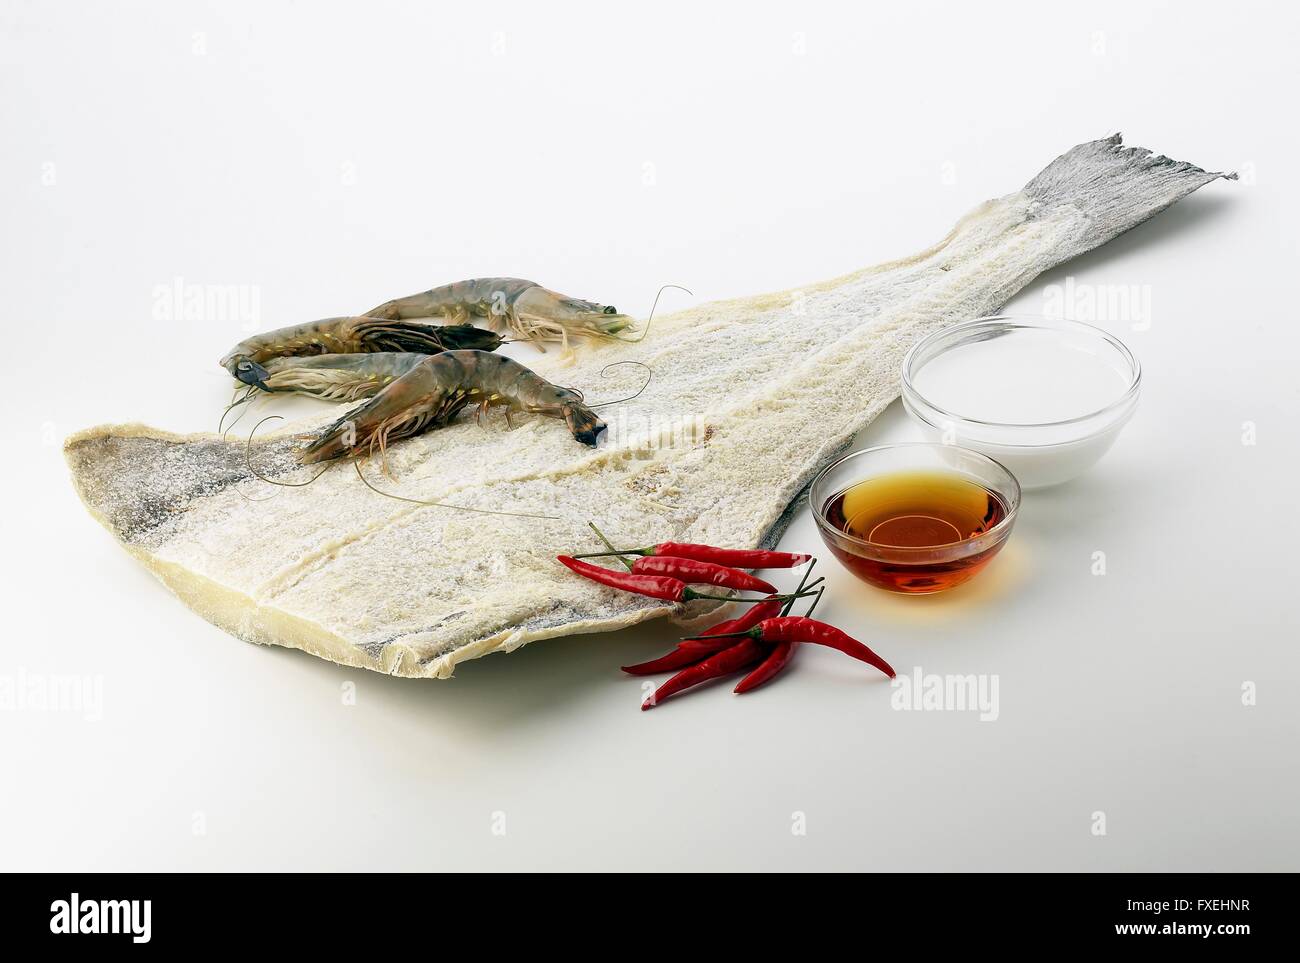 Dried cod (bacalhau), king prawns, fish sauce, coconut milk and fresh chillies, ingredients typical for Chinese-Macanese cuisine Stock Photo